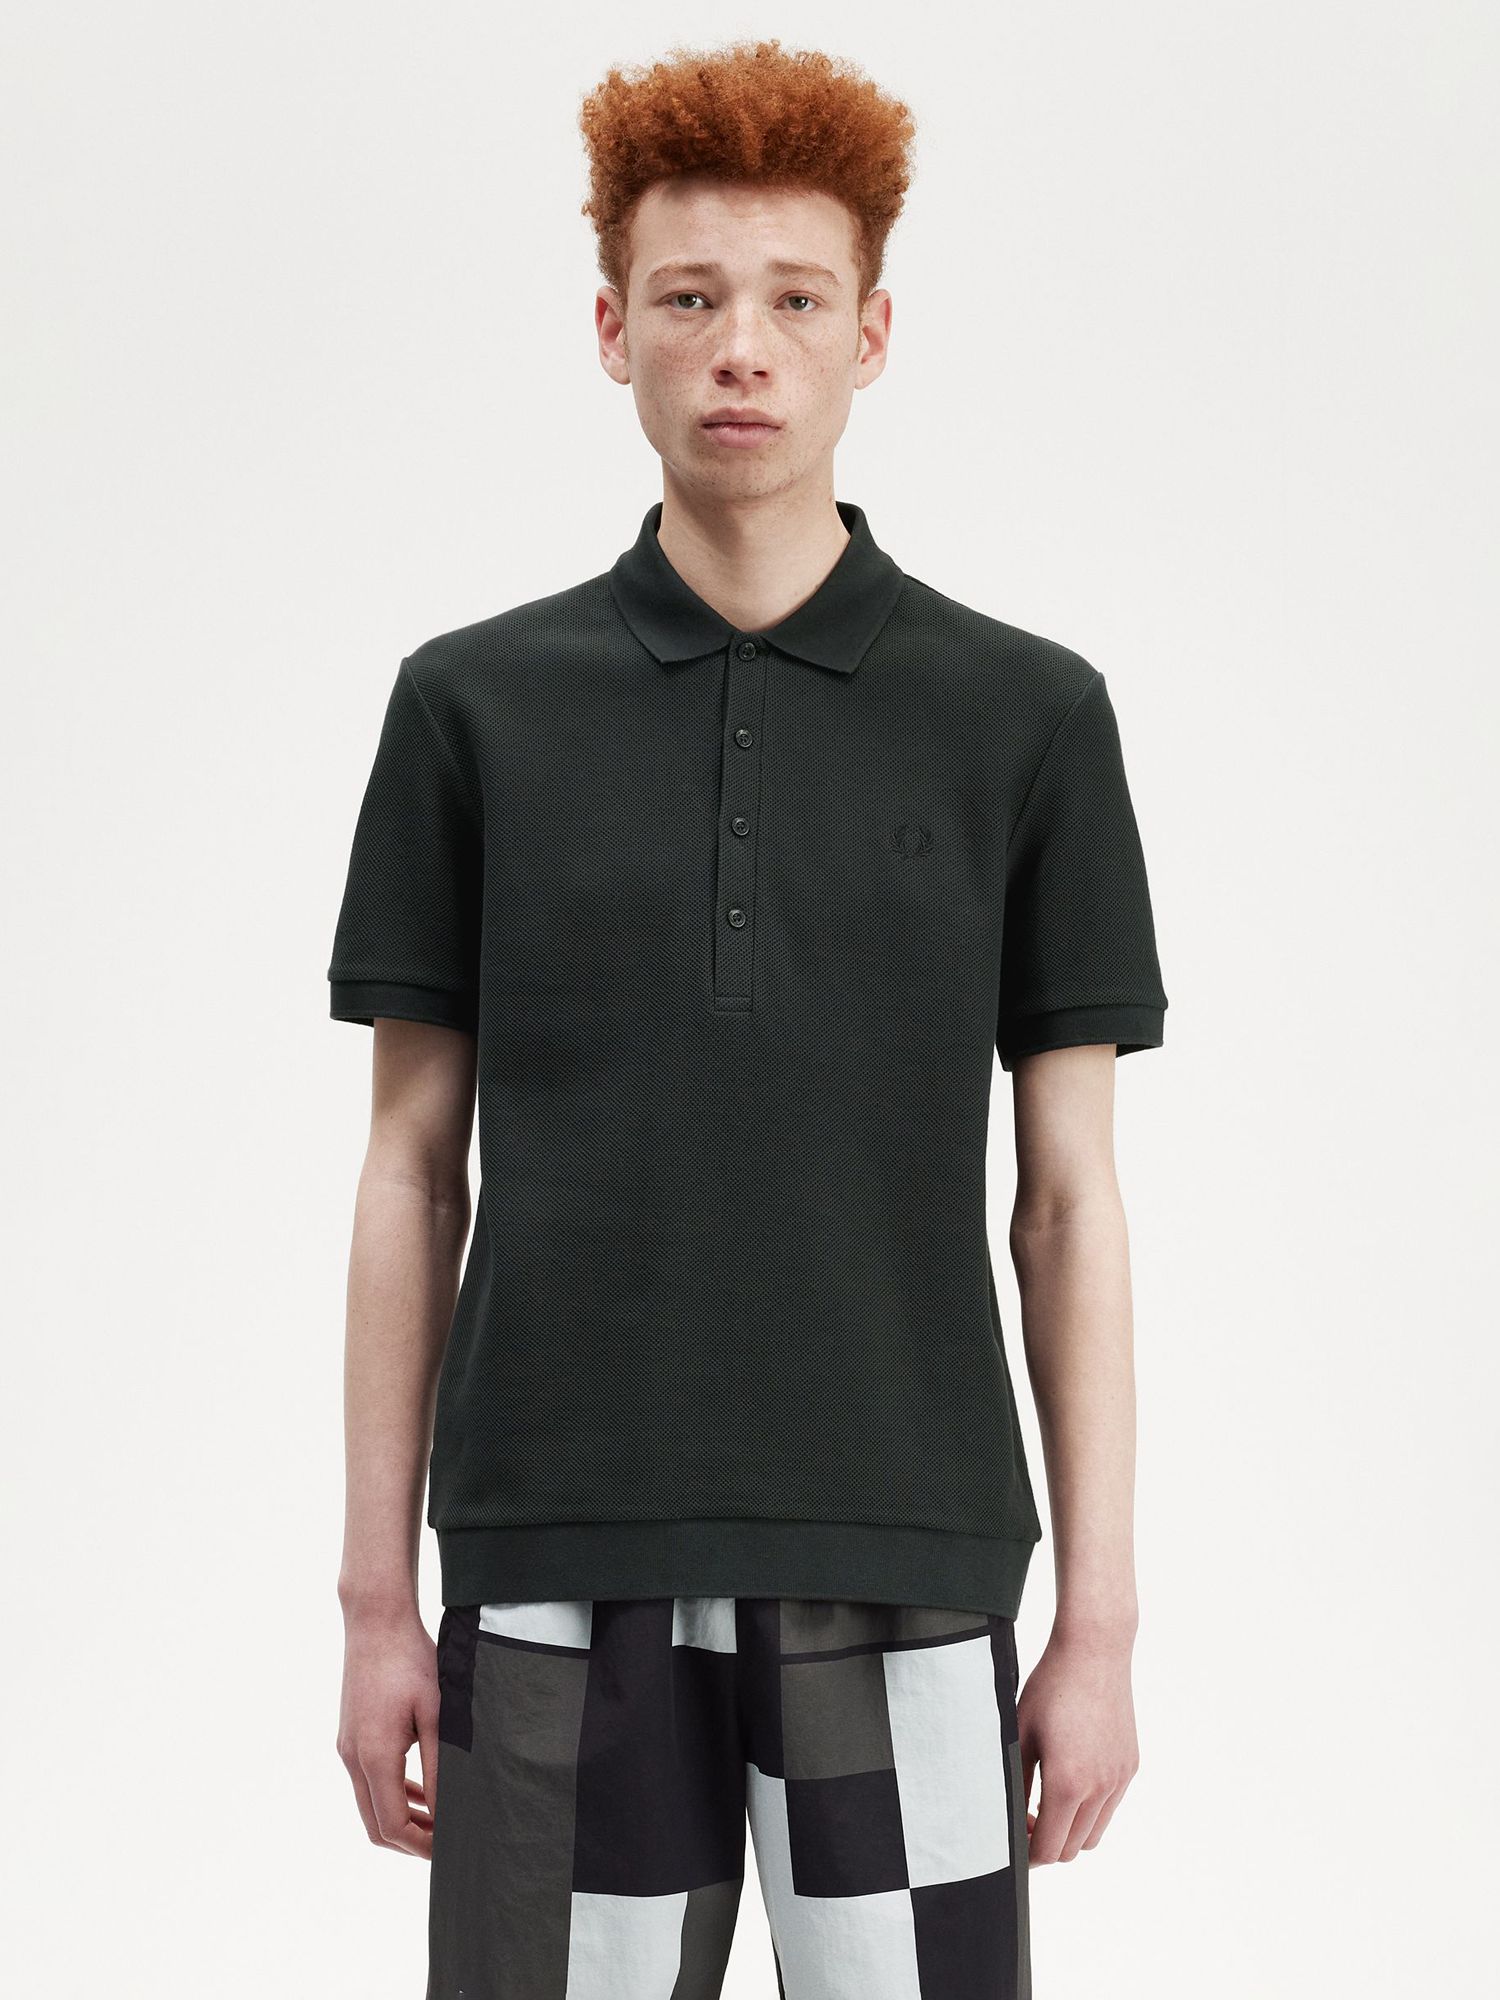 Fred Perry Honeycomb Cotton Polo Shirt, Night Green at John Lewis ...